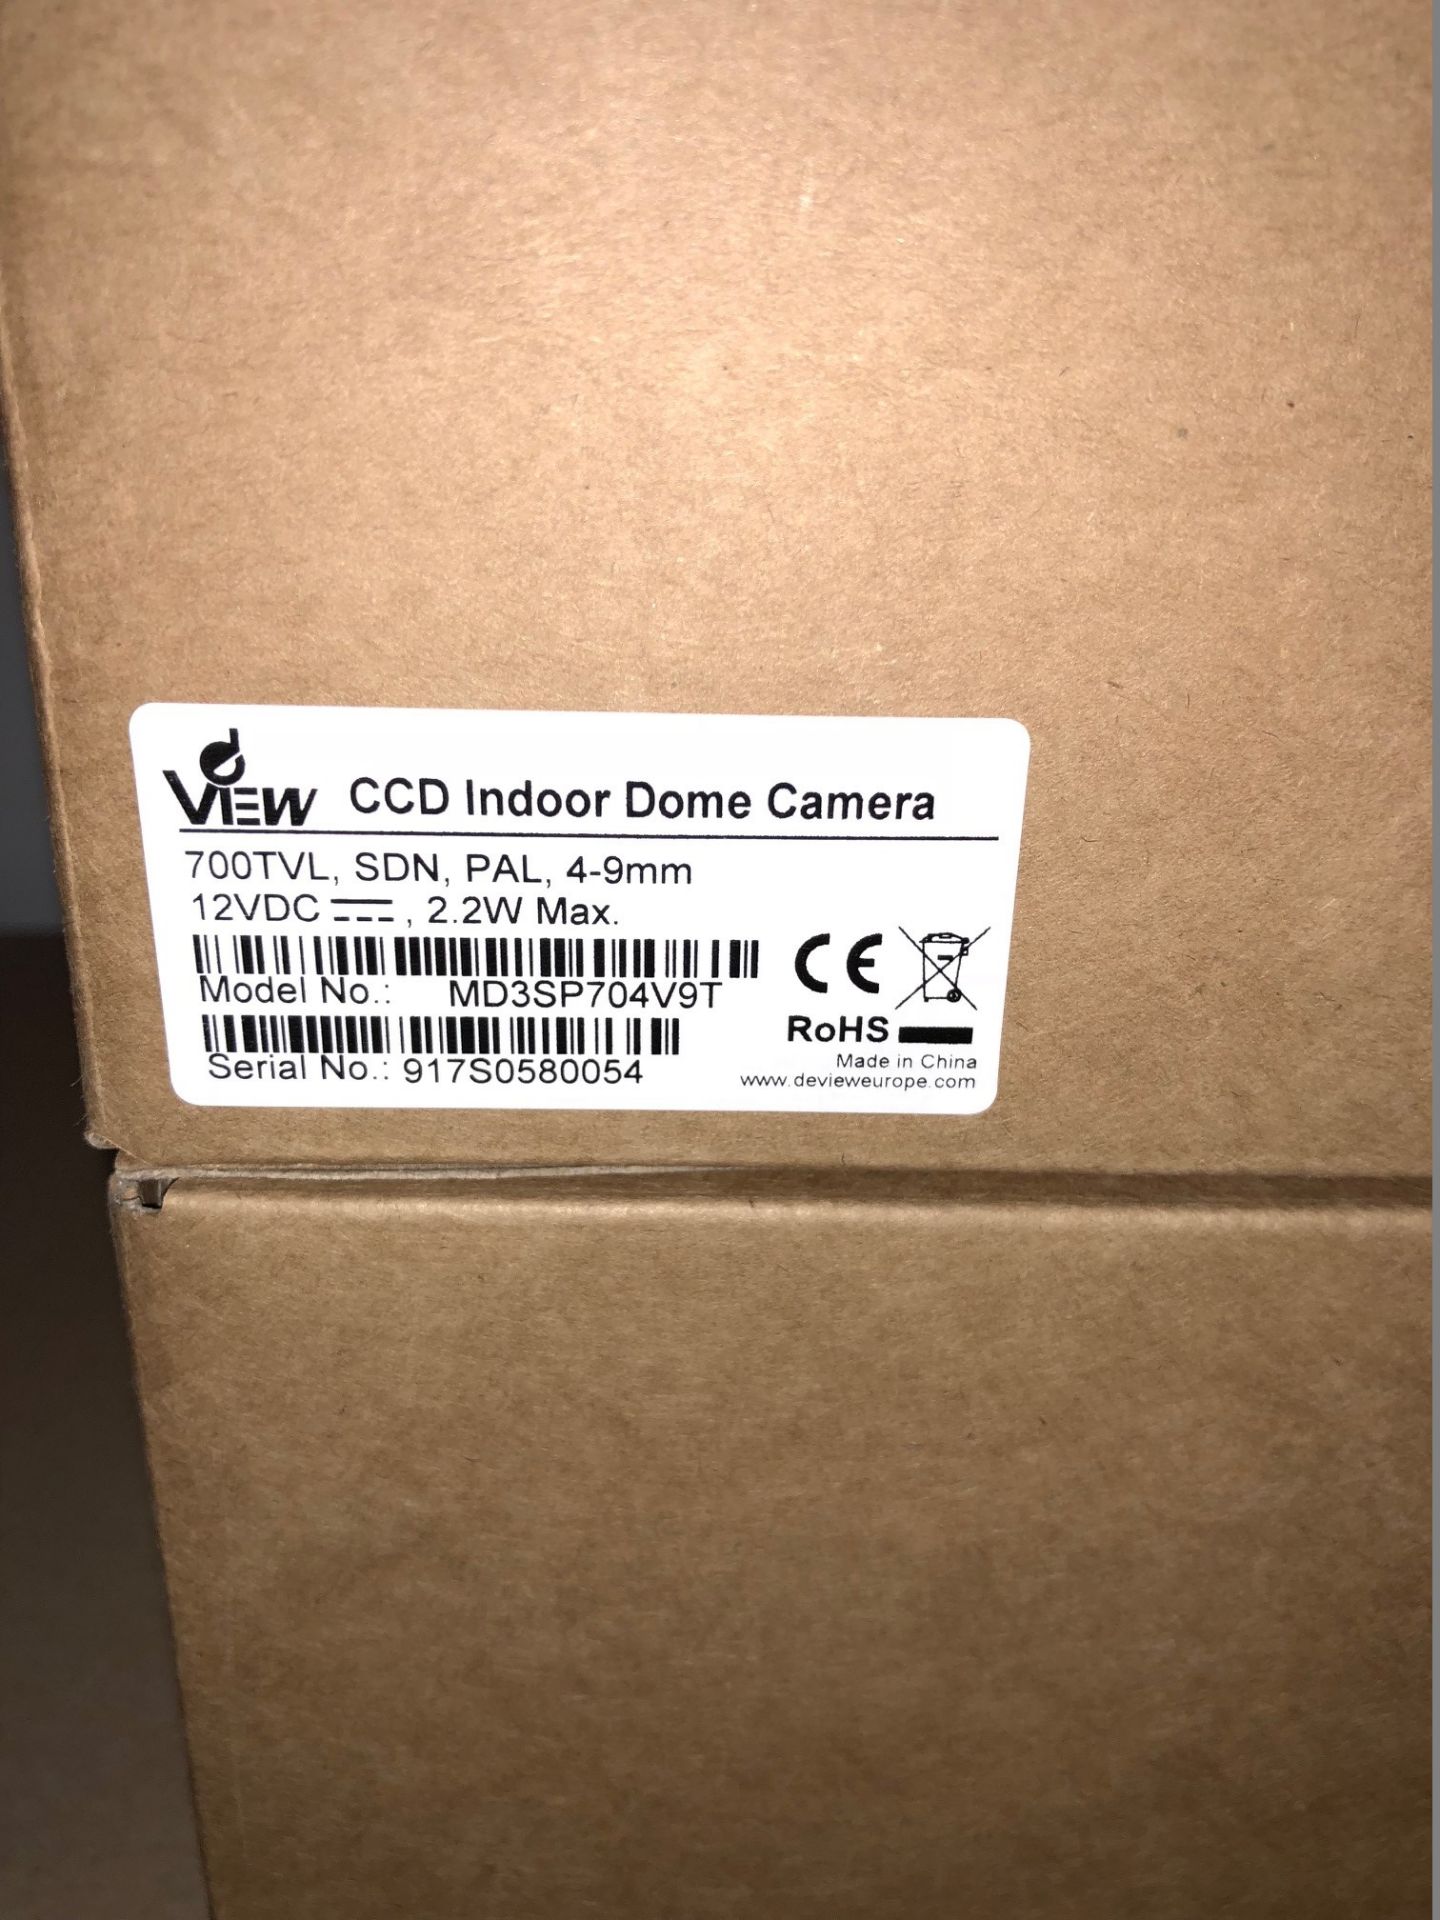 4 x dView CCD Indoor Dome Cameras - 700TVL, SDN, PAL, 4-9mm - Model MD3SP704V9T - Image 2 of 3